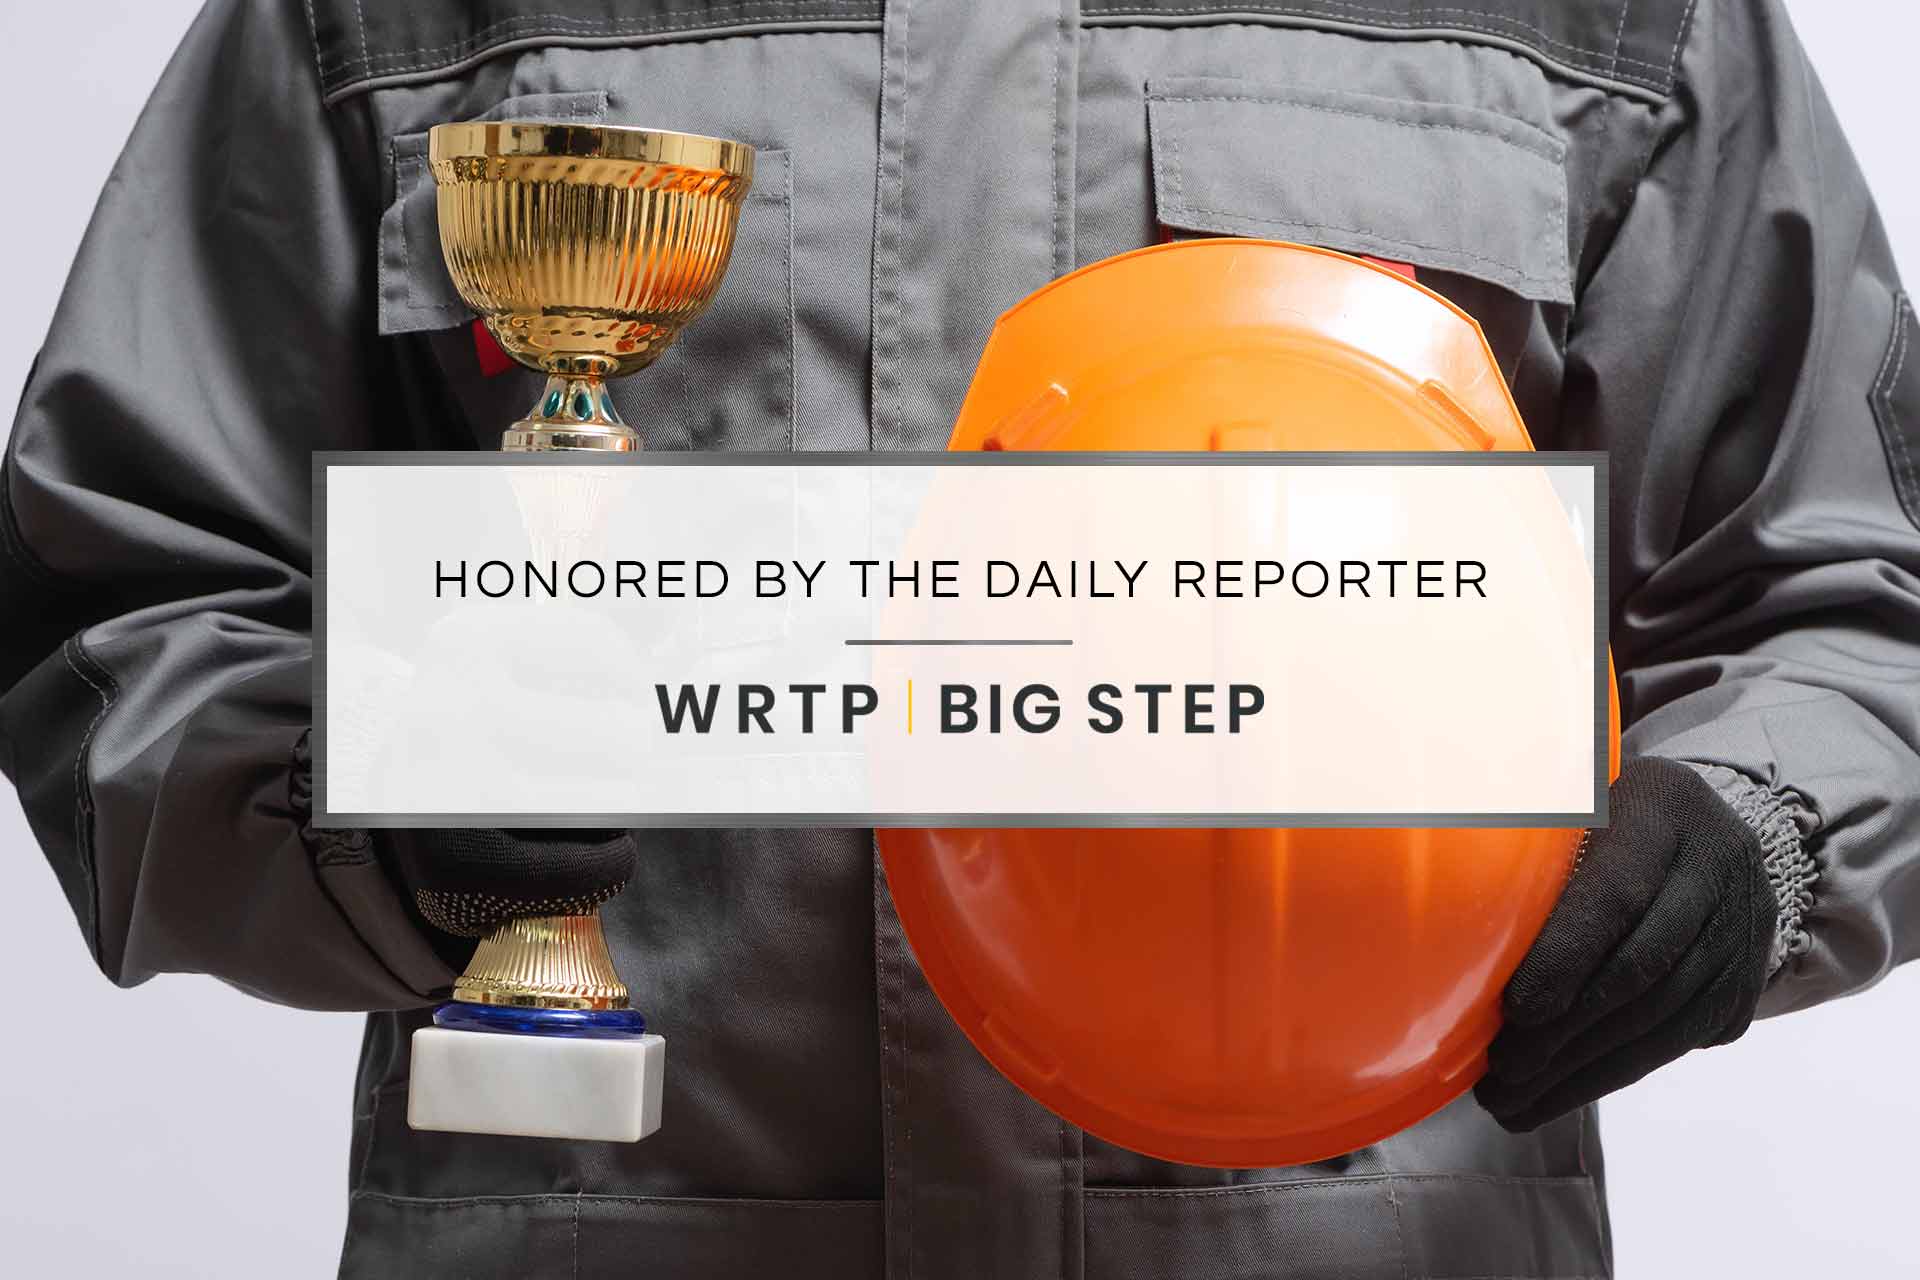 The Daily Reporter to Honor WRTP | BIG STEP at the 2022 Newsmakers of the Year Awards